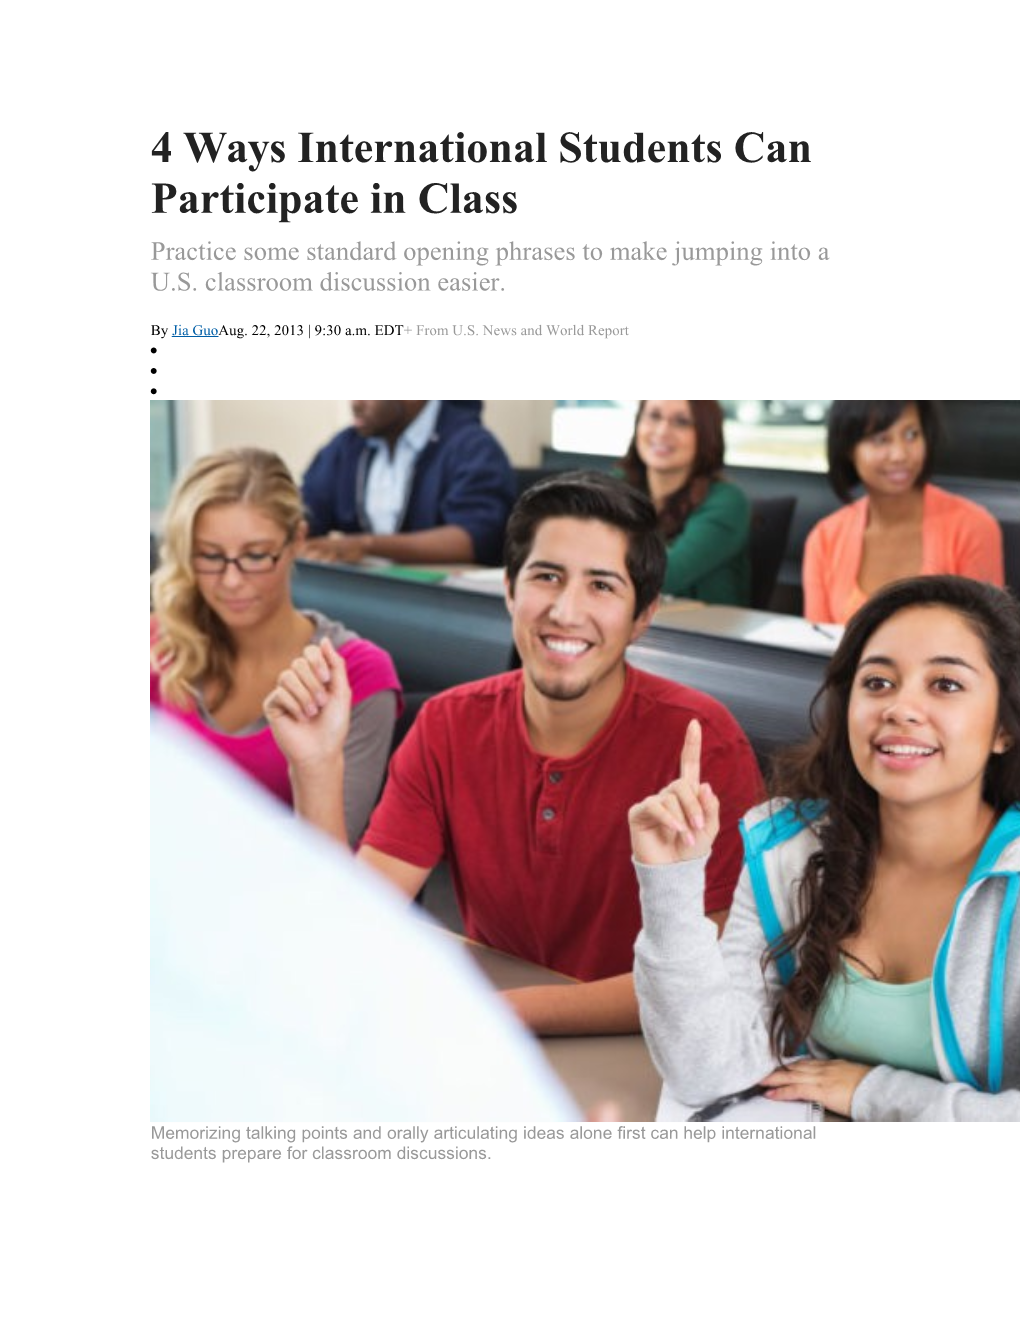 4 Ways International Students Can Participate in Class